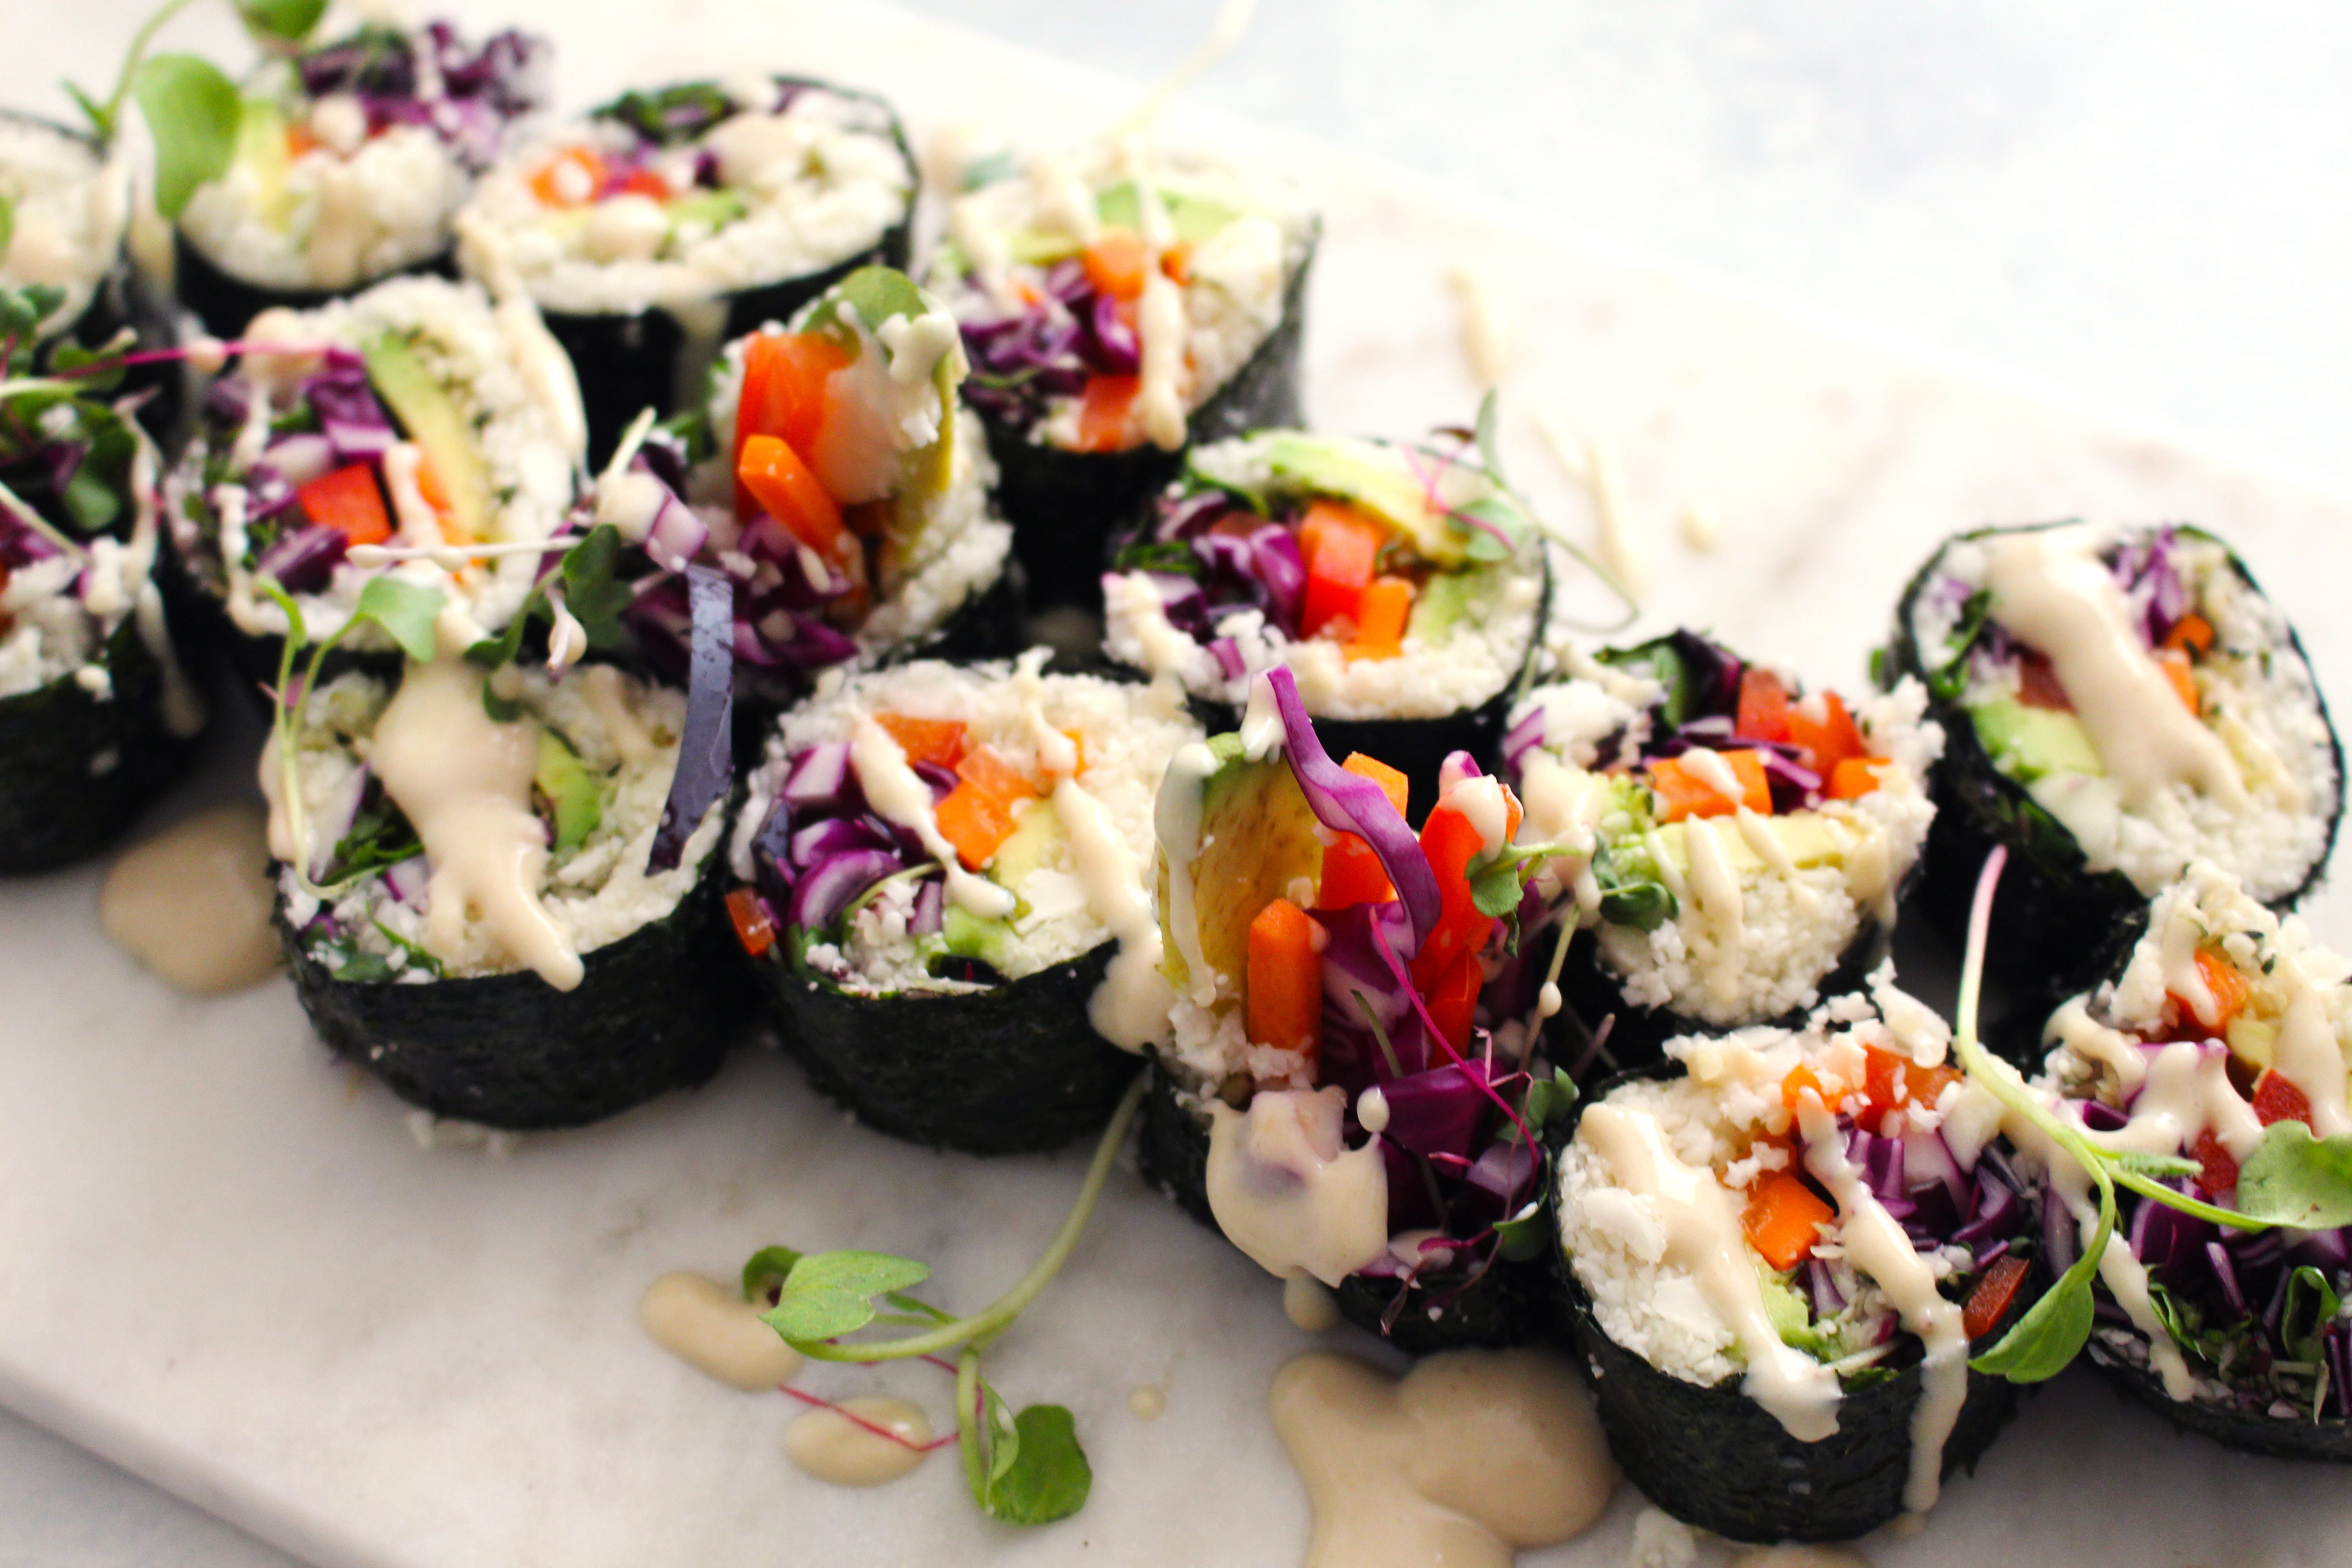 Is Sushi Veg: Vegetarian Visions in Sushi Delights